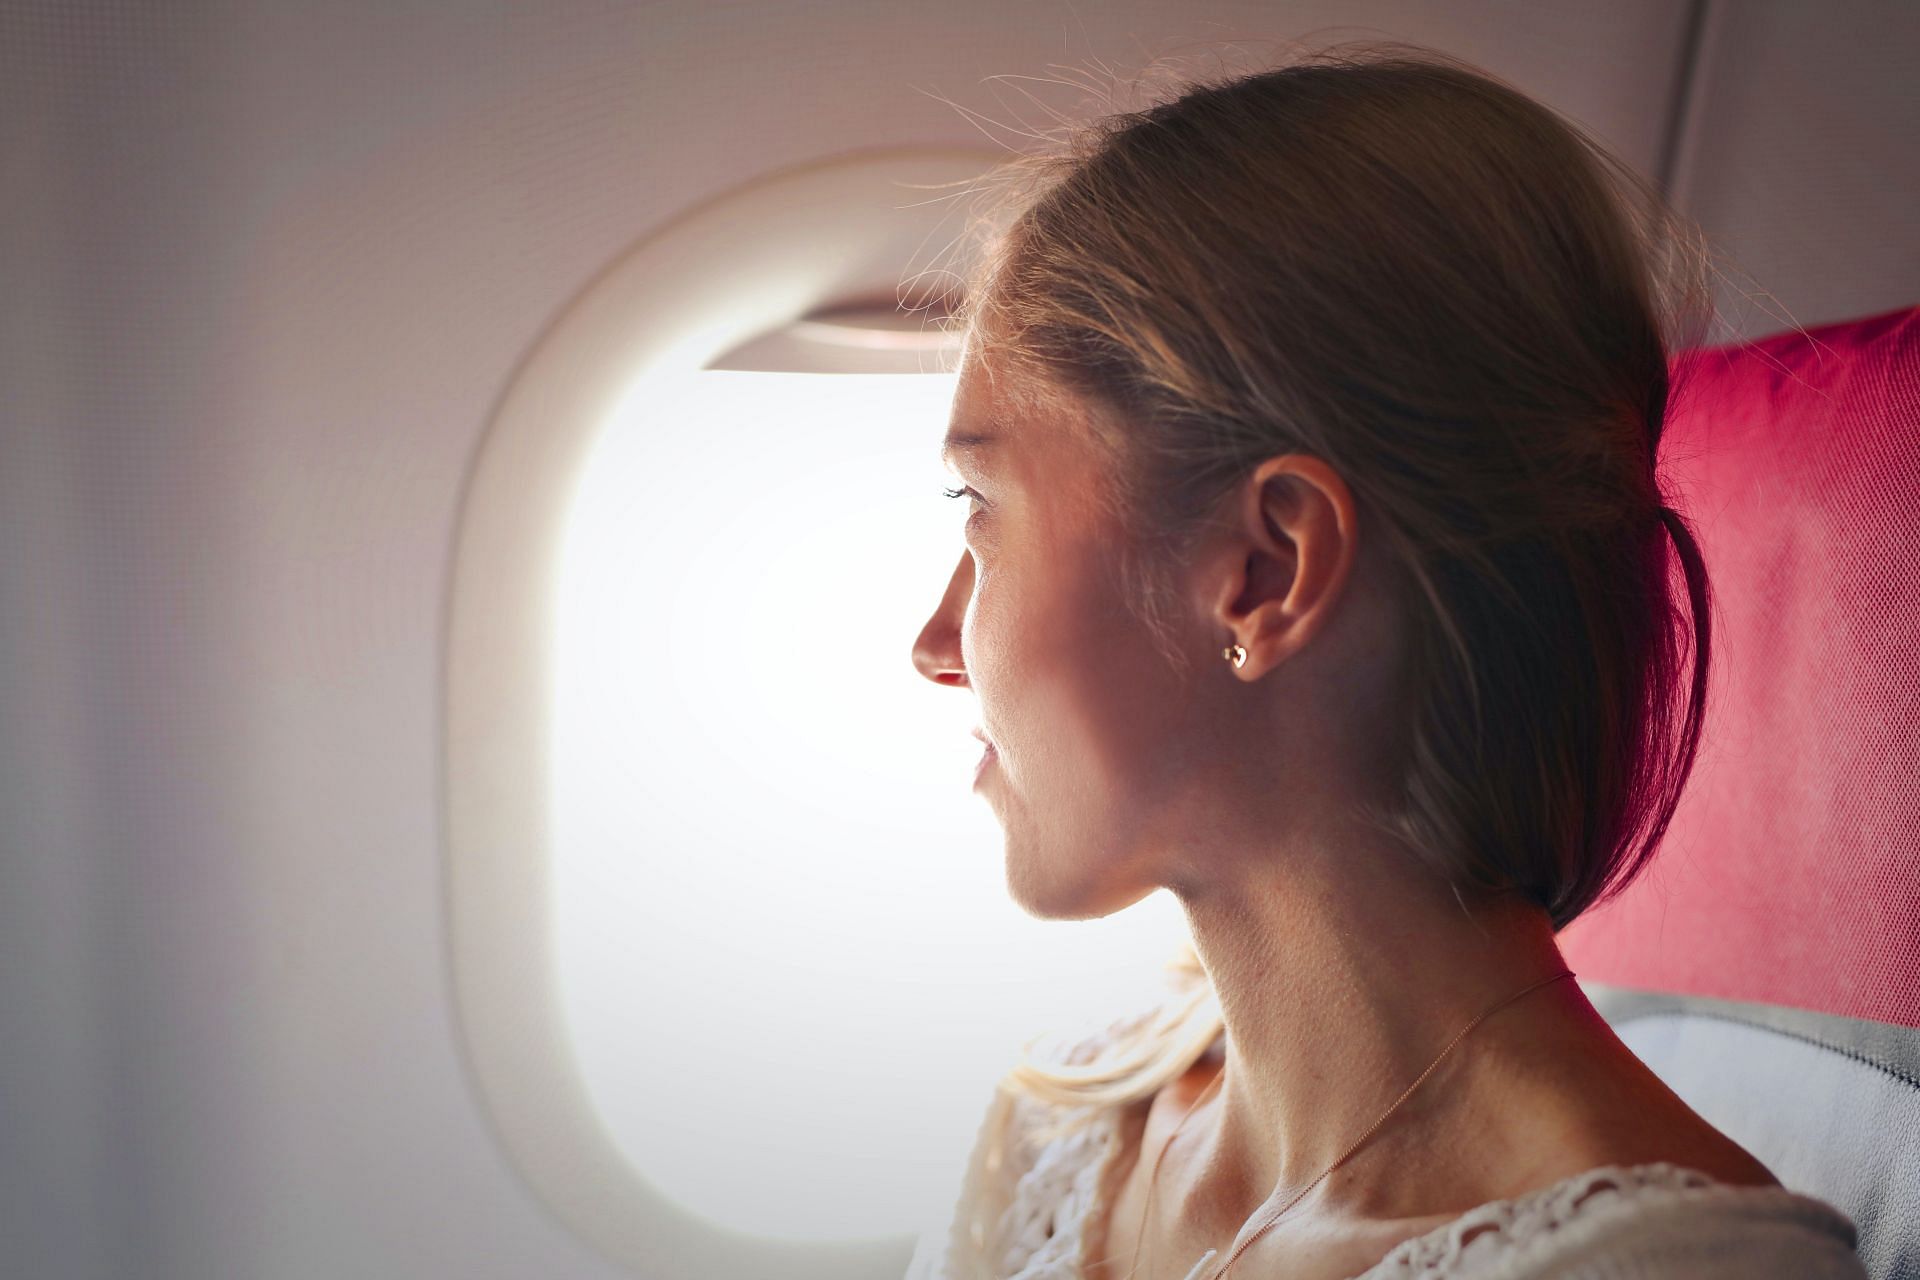 Sitting on flights for too long causes water weight gain.(Photo by Adrienn via pexels)